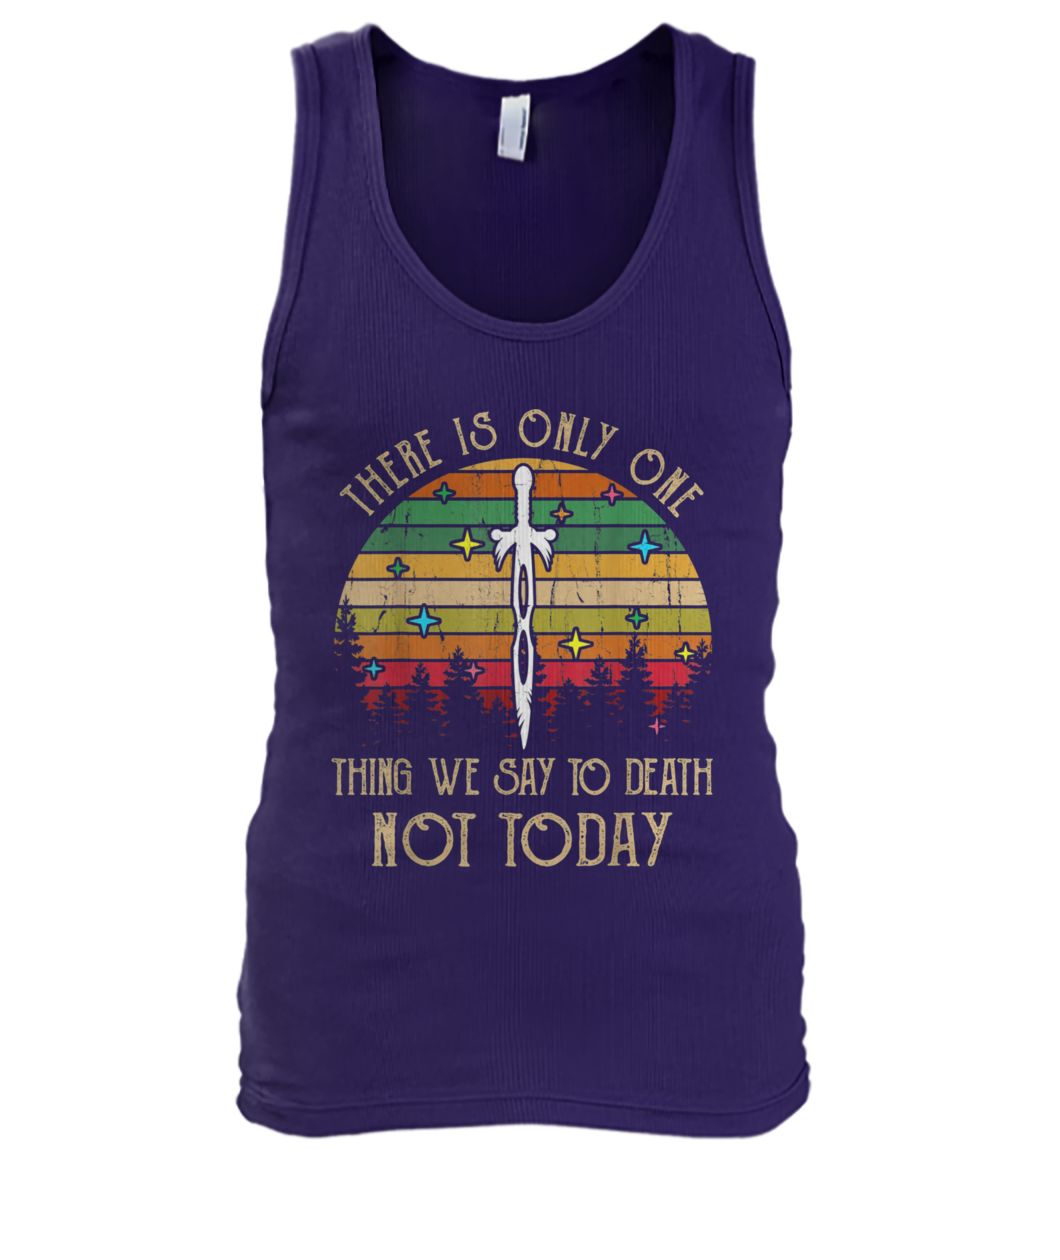 Game of thrones there is only one thing we say to death not today men's tank top